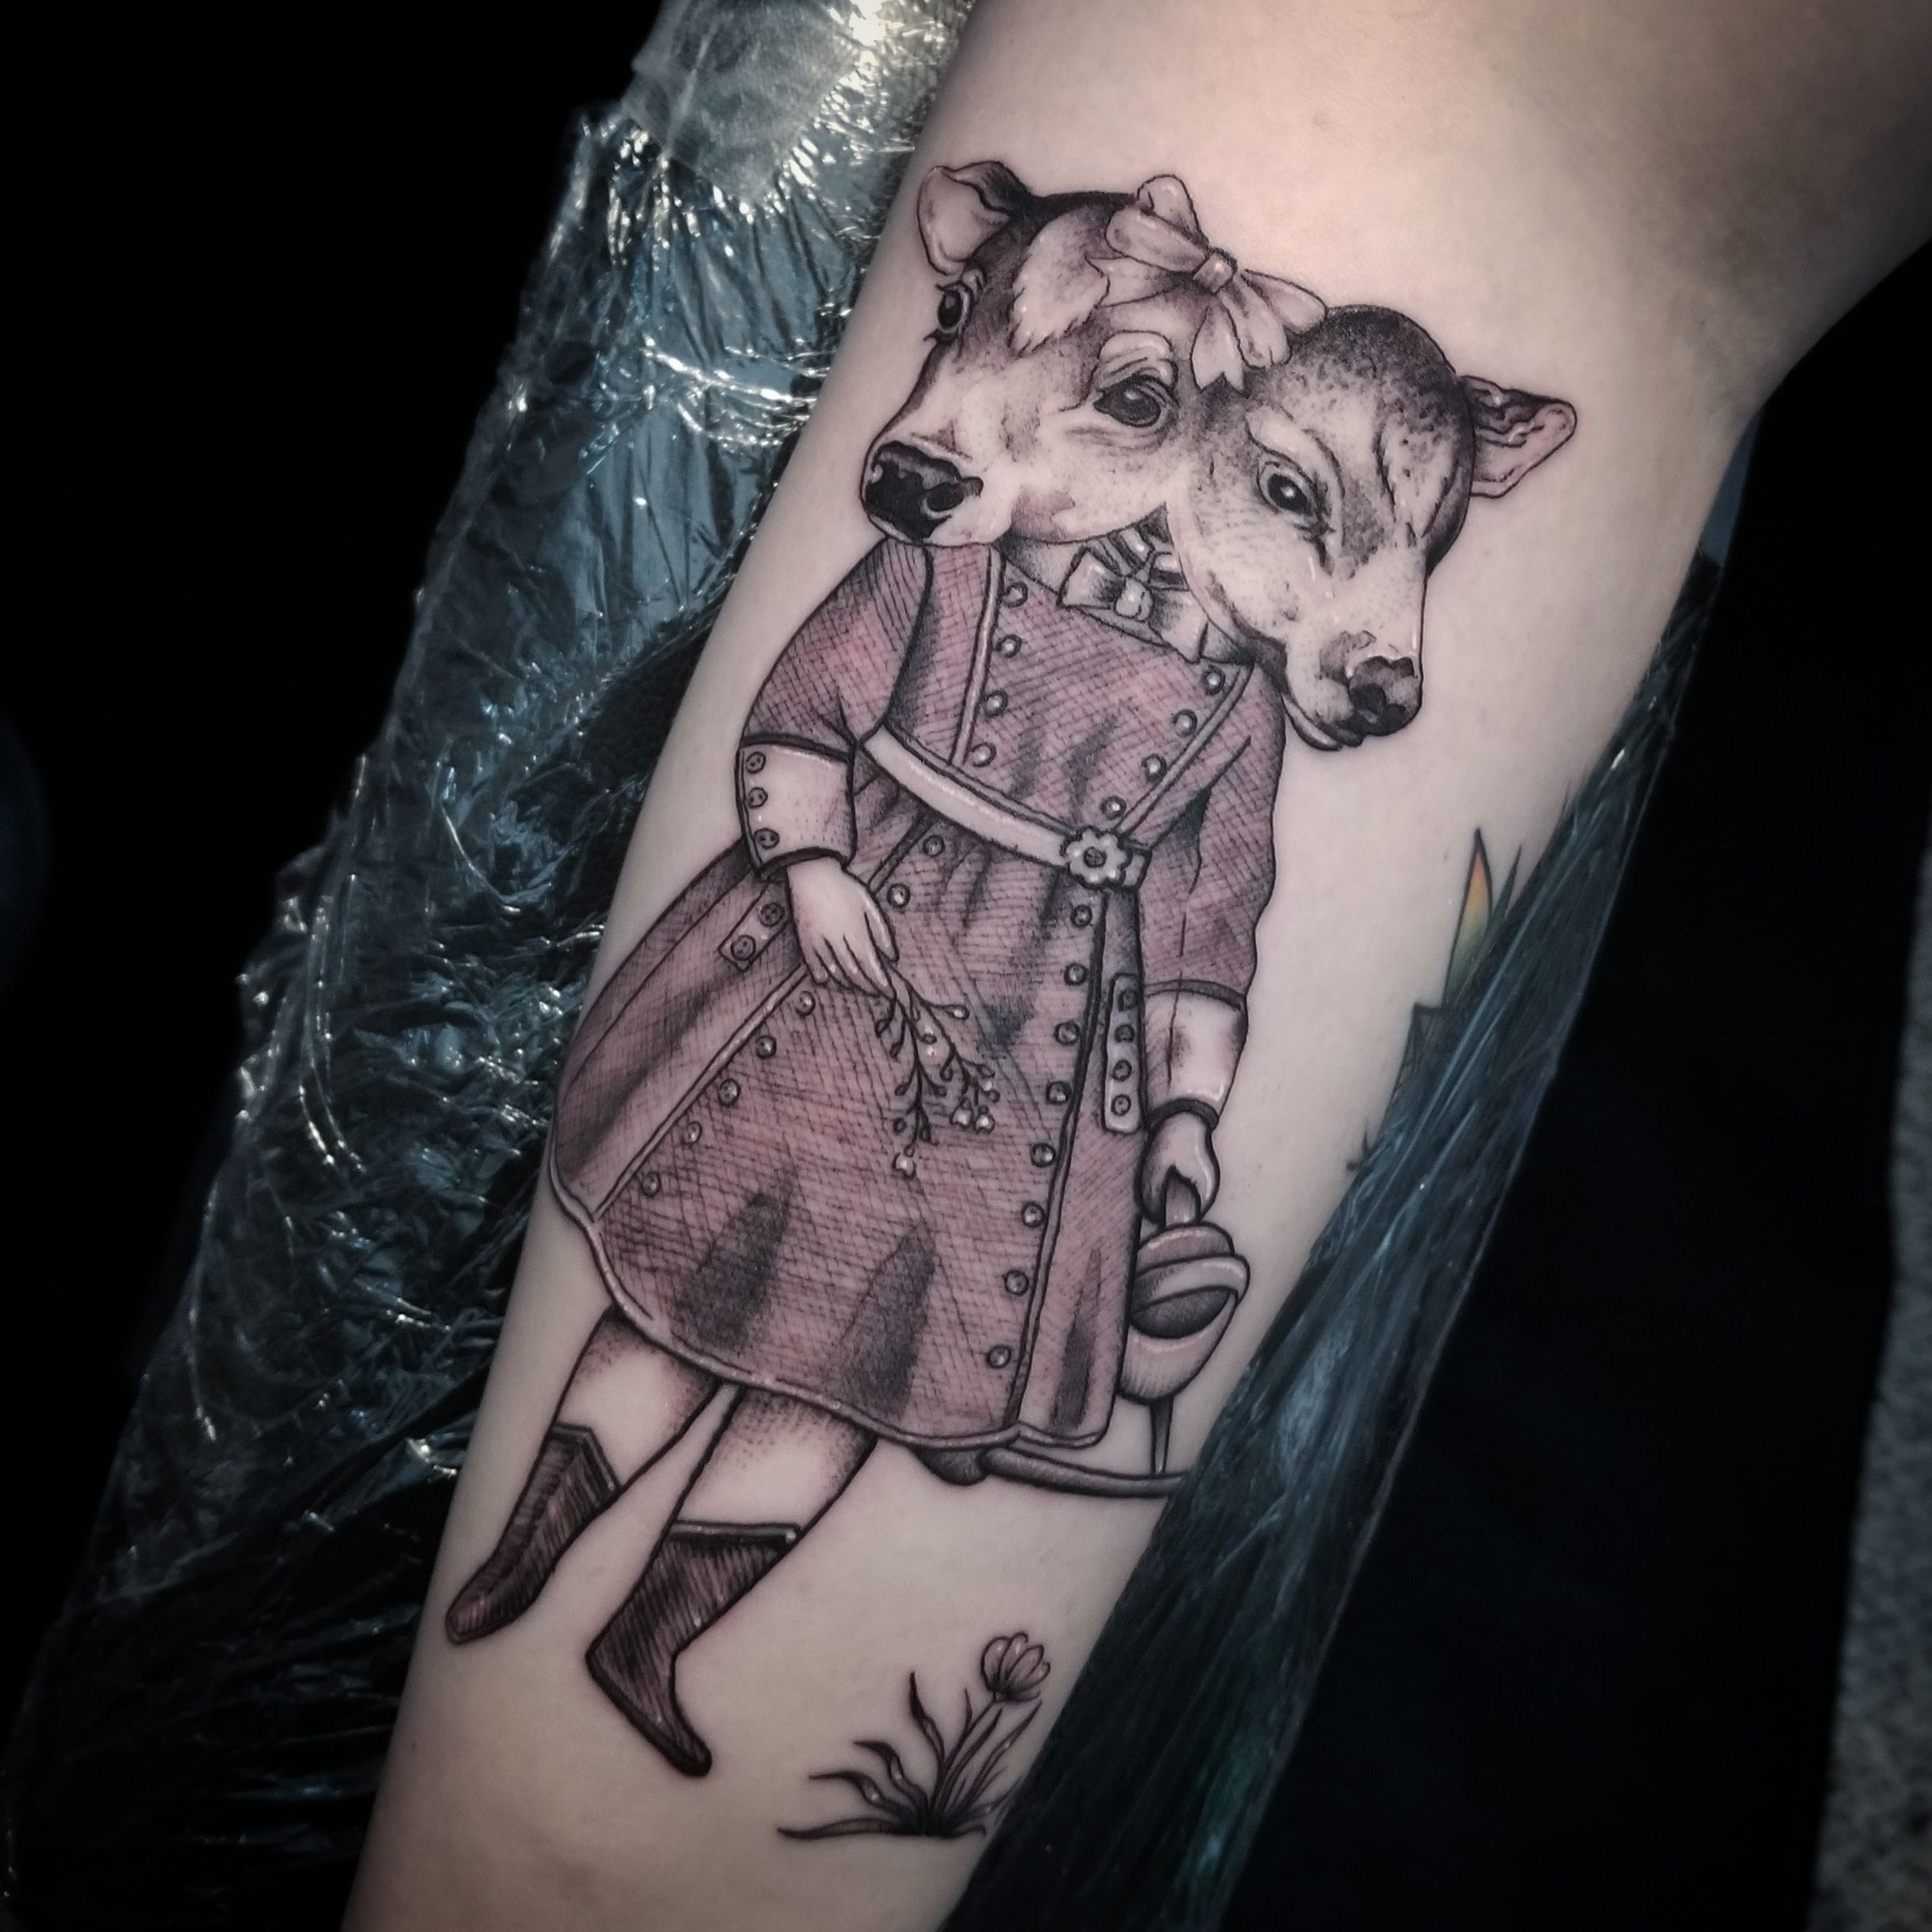 sweet pink calf on myself based off the poem the two headed calf by laura  gilpin  5rl  7rs  25 hours  madalynpokes on instagram  rsticknpokes